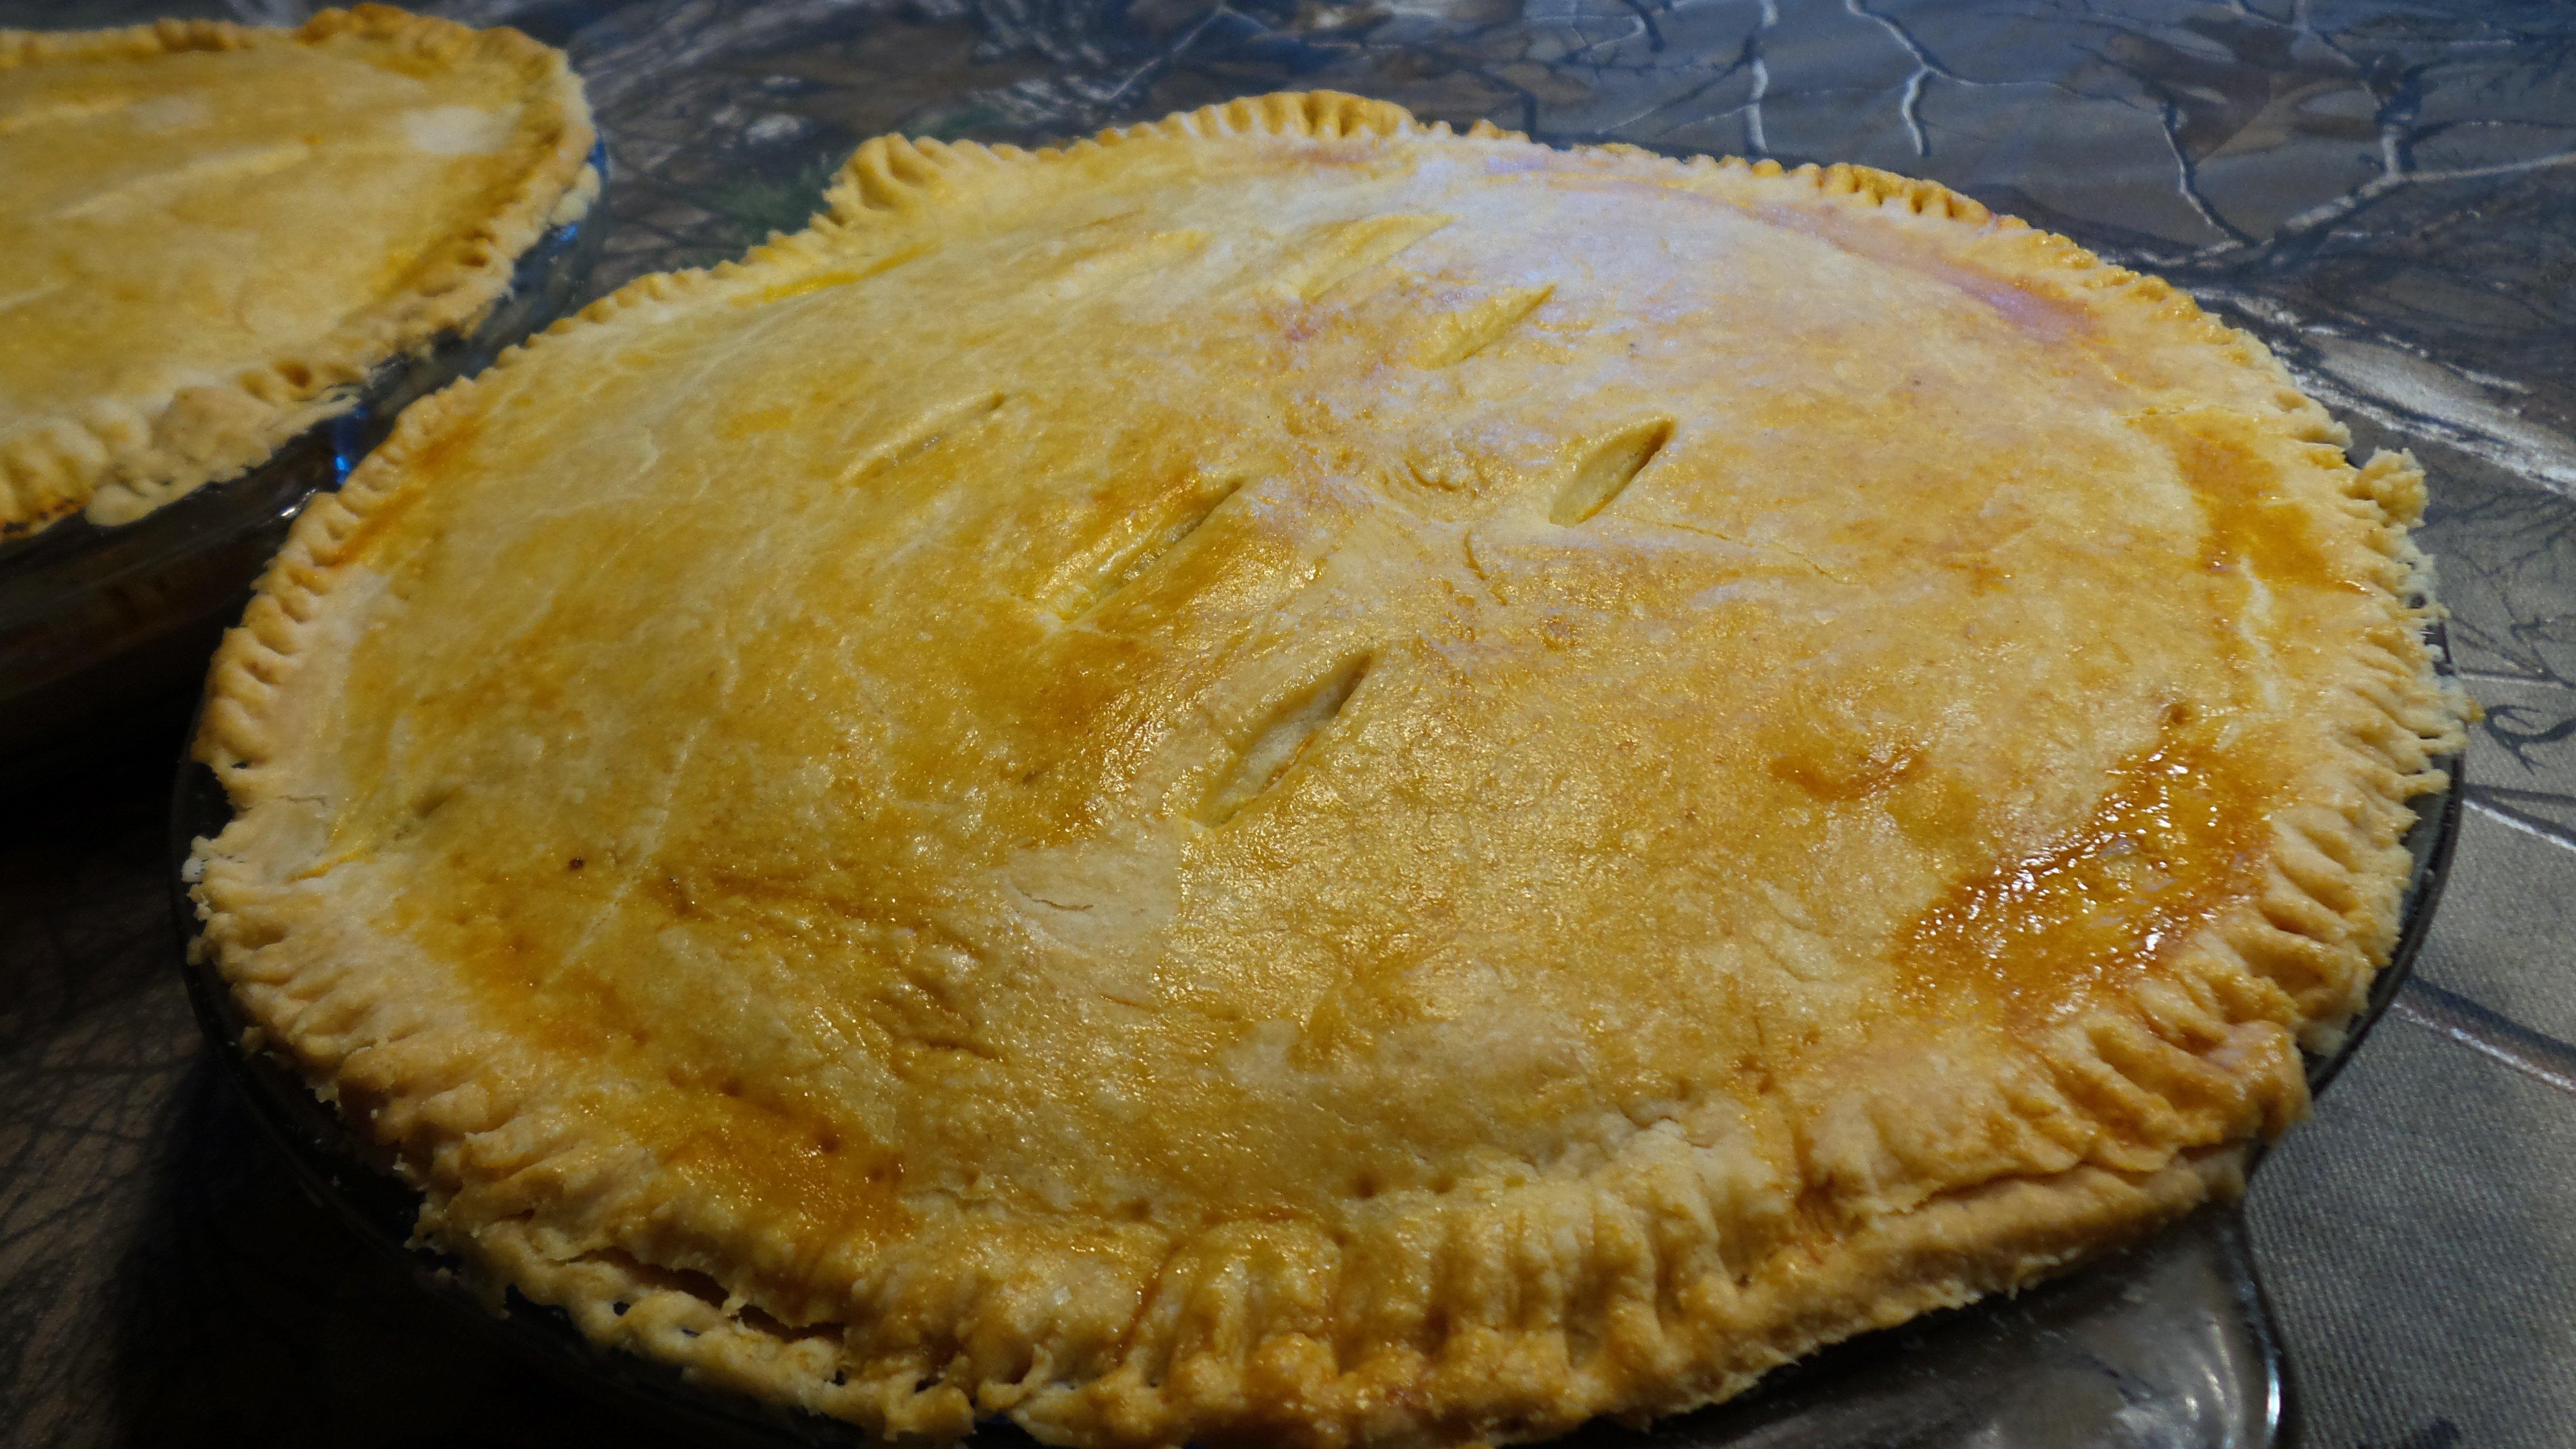 Bake the pie until the crust is golden brown and flaky.